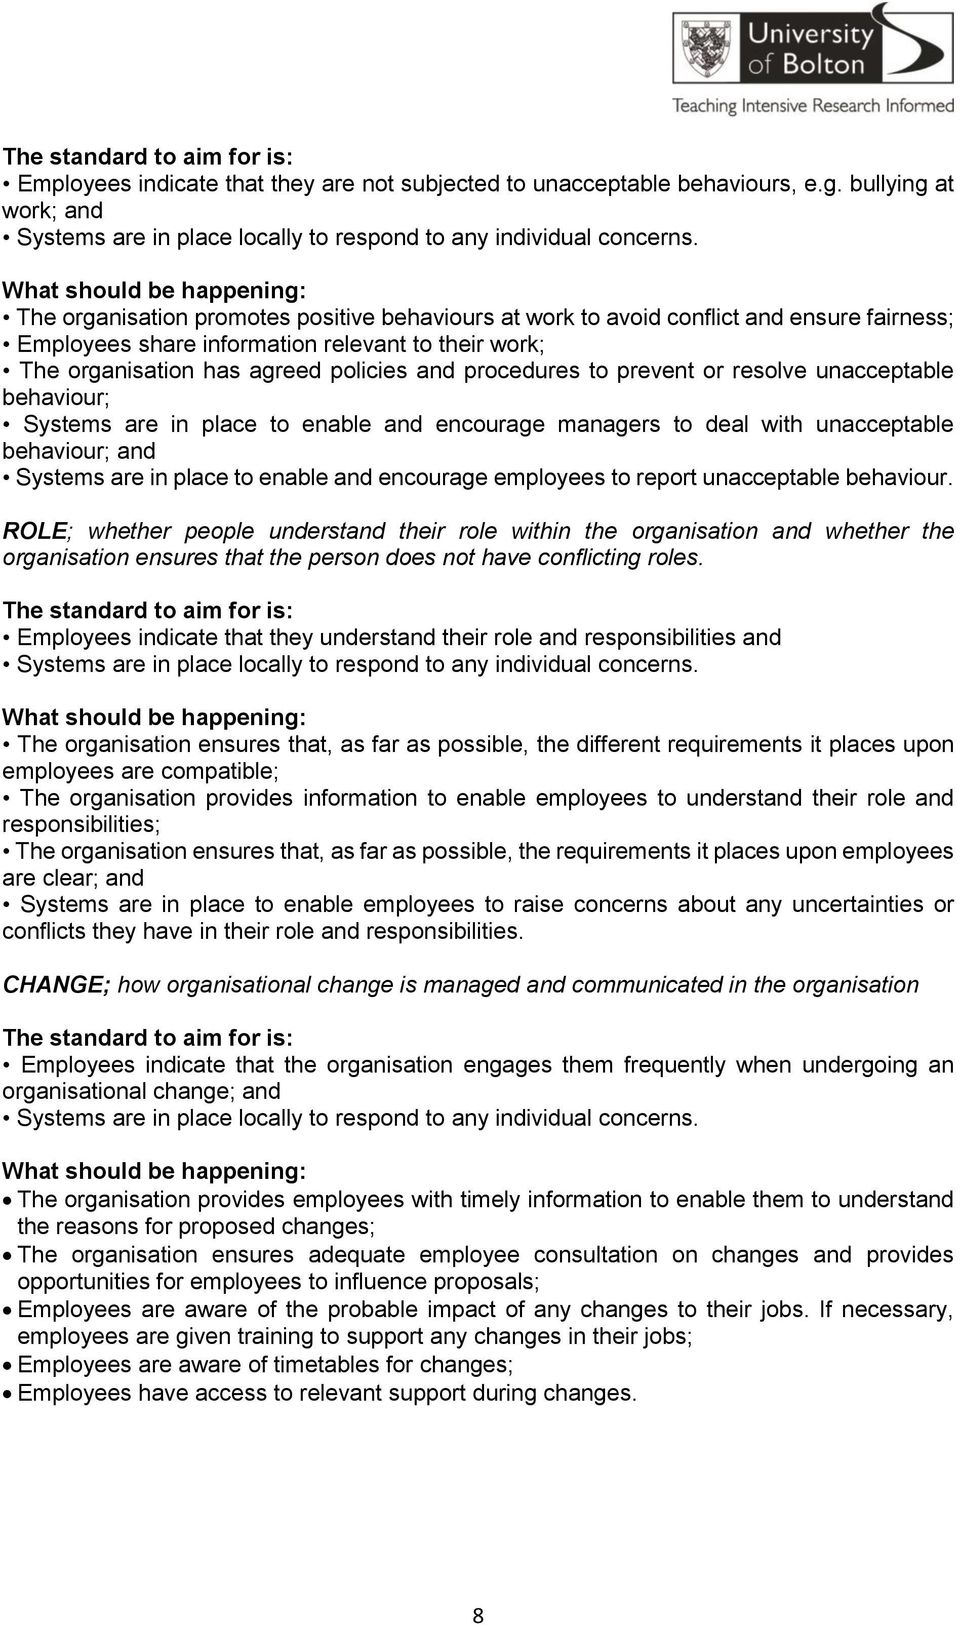 policies and procedures to prevent or resolve unacceptable behaviour; Systems are in place to enable and encourage managers to deal with unacceptable behaviour; and Systems are in place to enable and